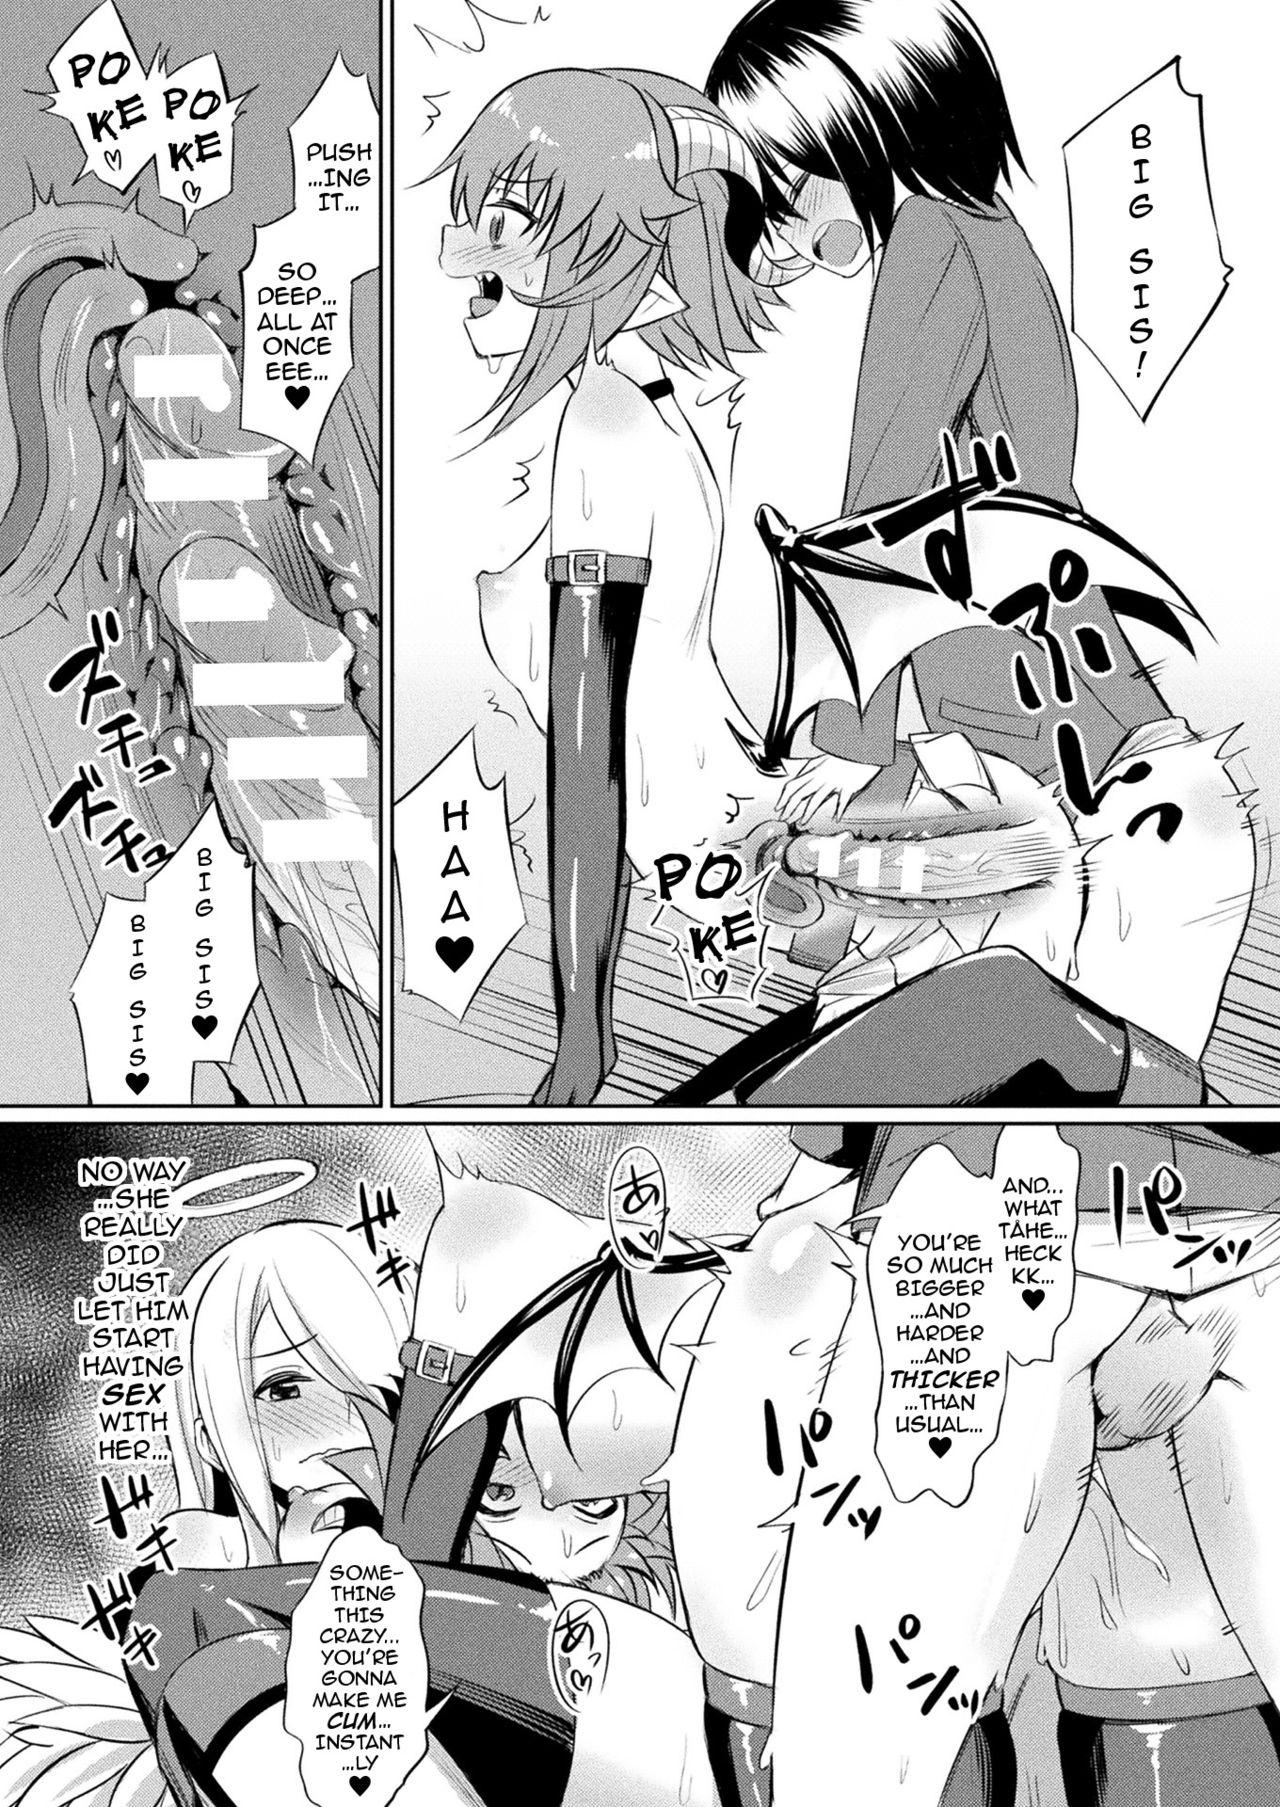 Small Boobs Kimochii Rakuten Shiyo | Let’s Enjoy the Pleasures of FALLING FROM GRACE Together Cumming - Page 10